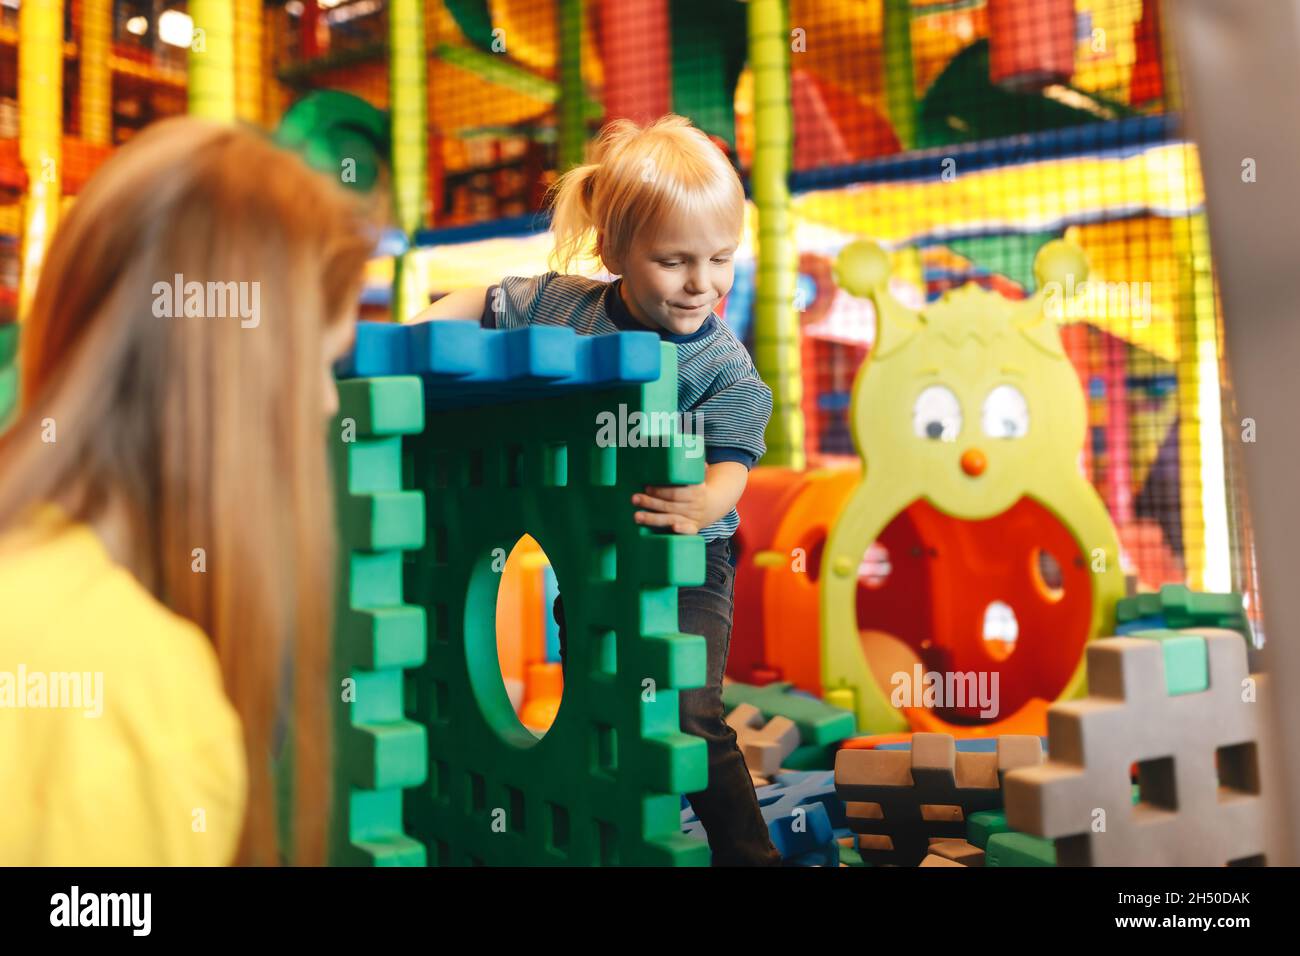 Happy Kid Playing With Big Puzzles in a Playground Center. Child With Young Mother Having Fun Together. Boy Contructing House With Toy Blocks Stock Photo